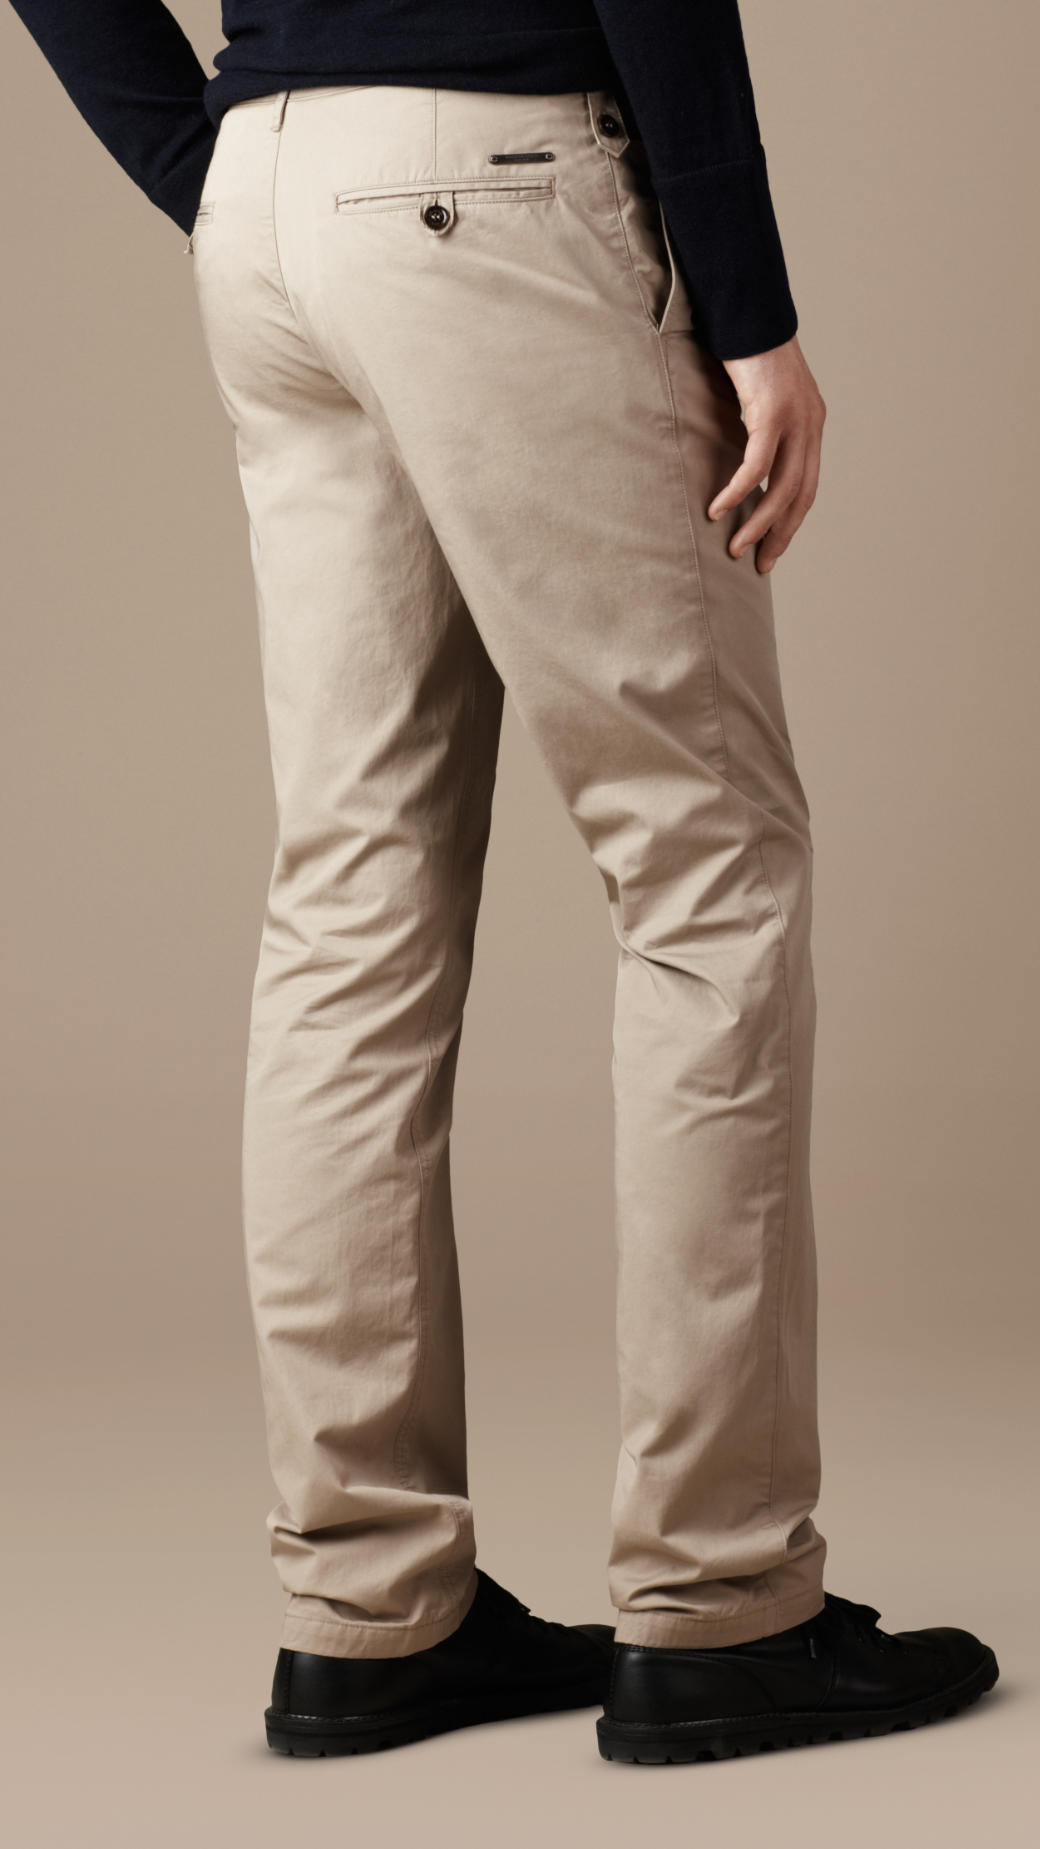 Burberry Slim Fit Cotton Chinos in Brown for Men - Lyst